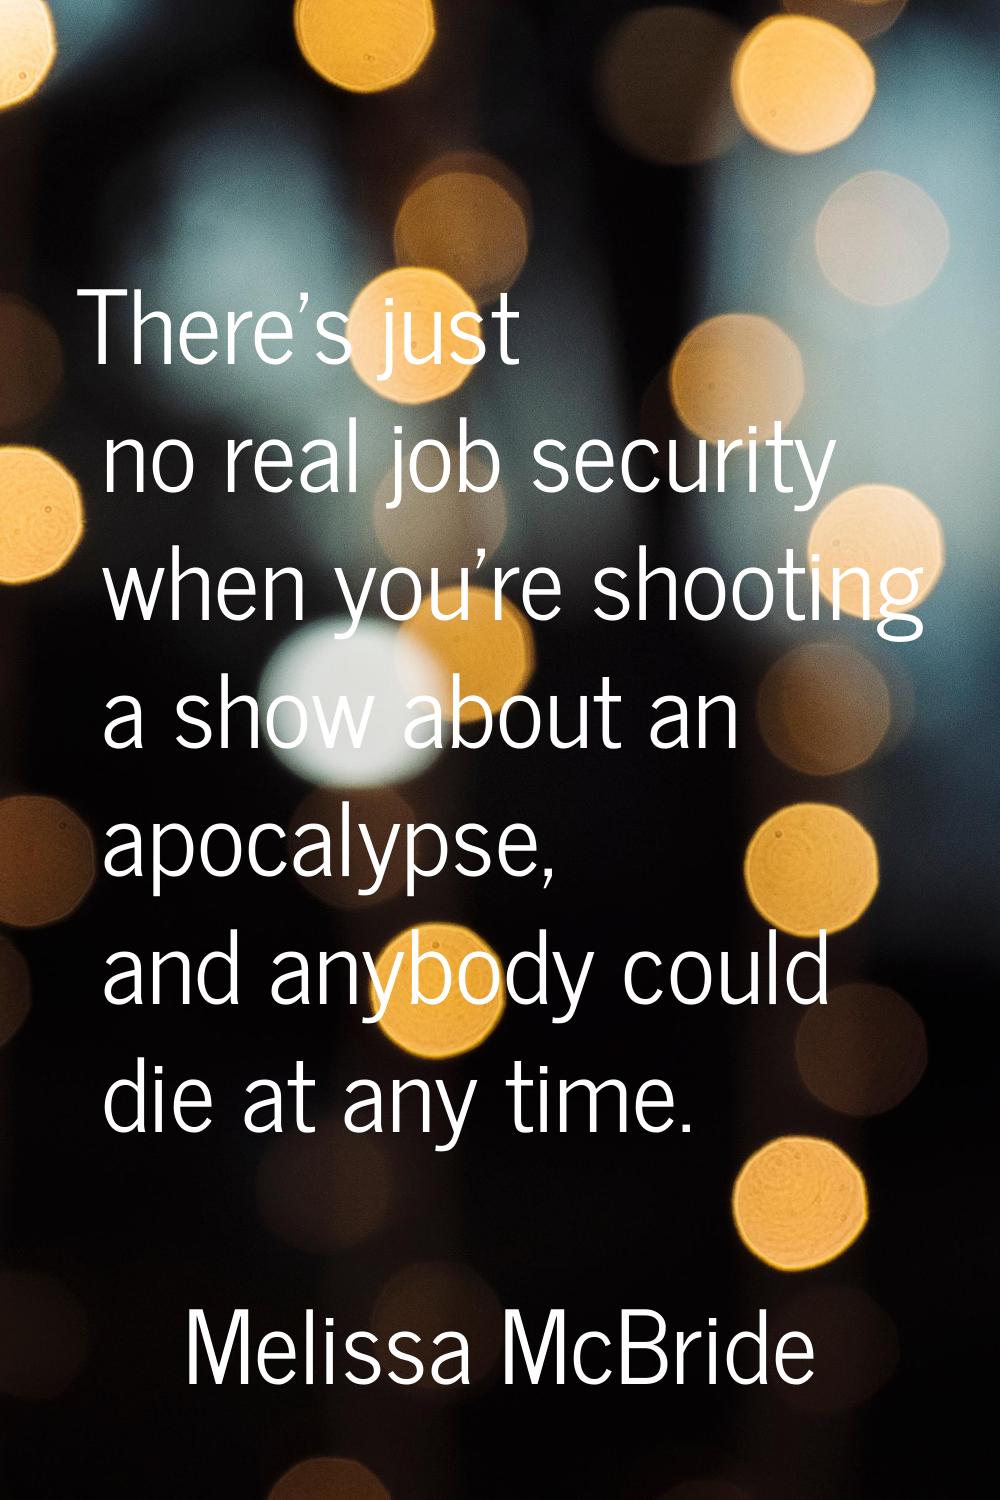 There's just no real job security when you're shooting a show about an apocalypse, and anybody coul